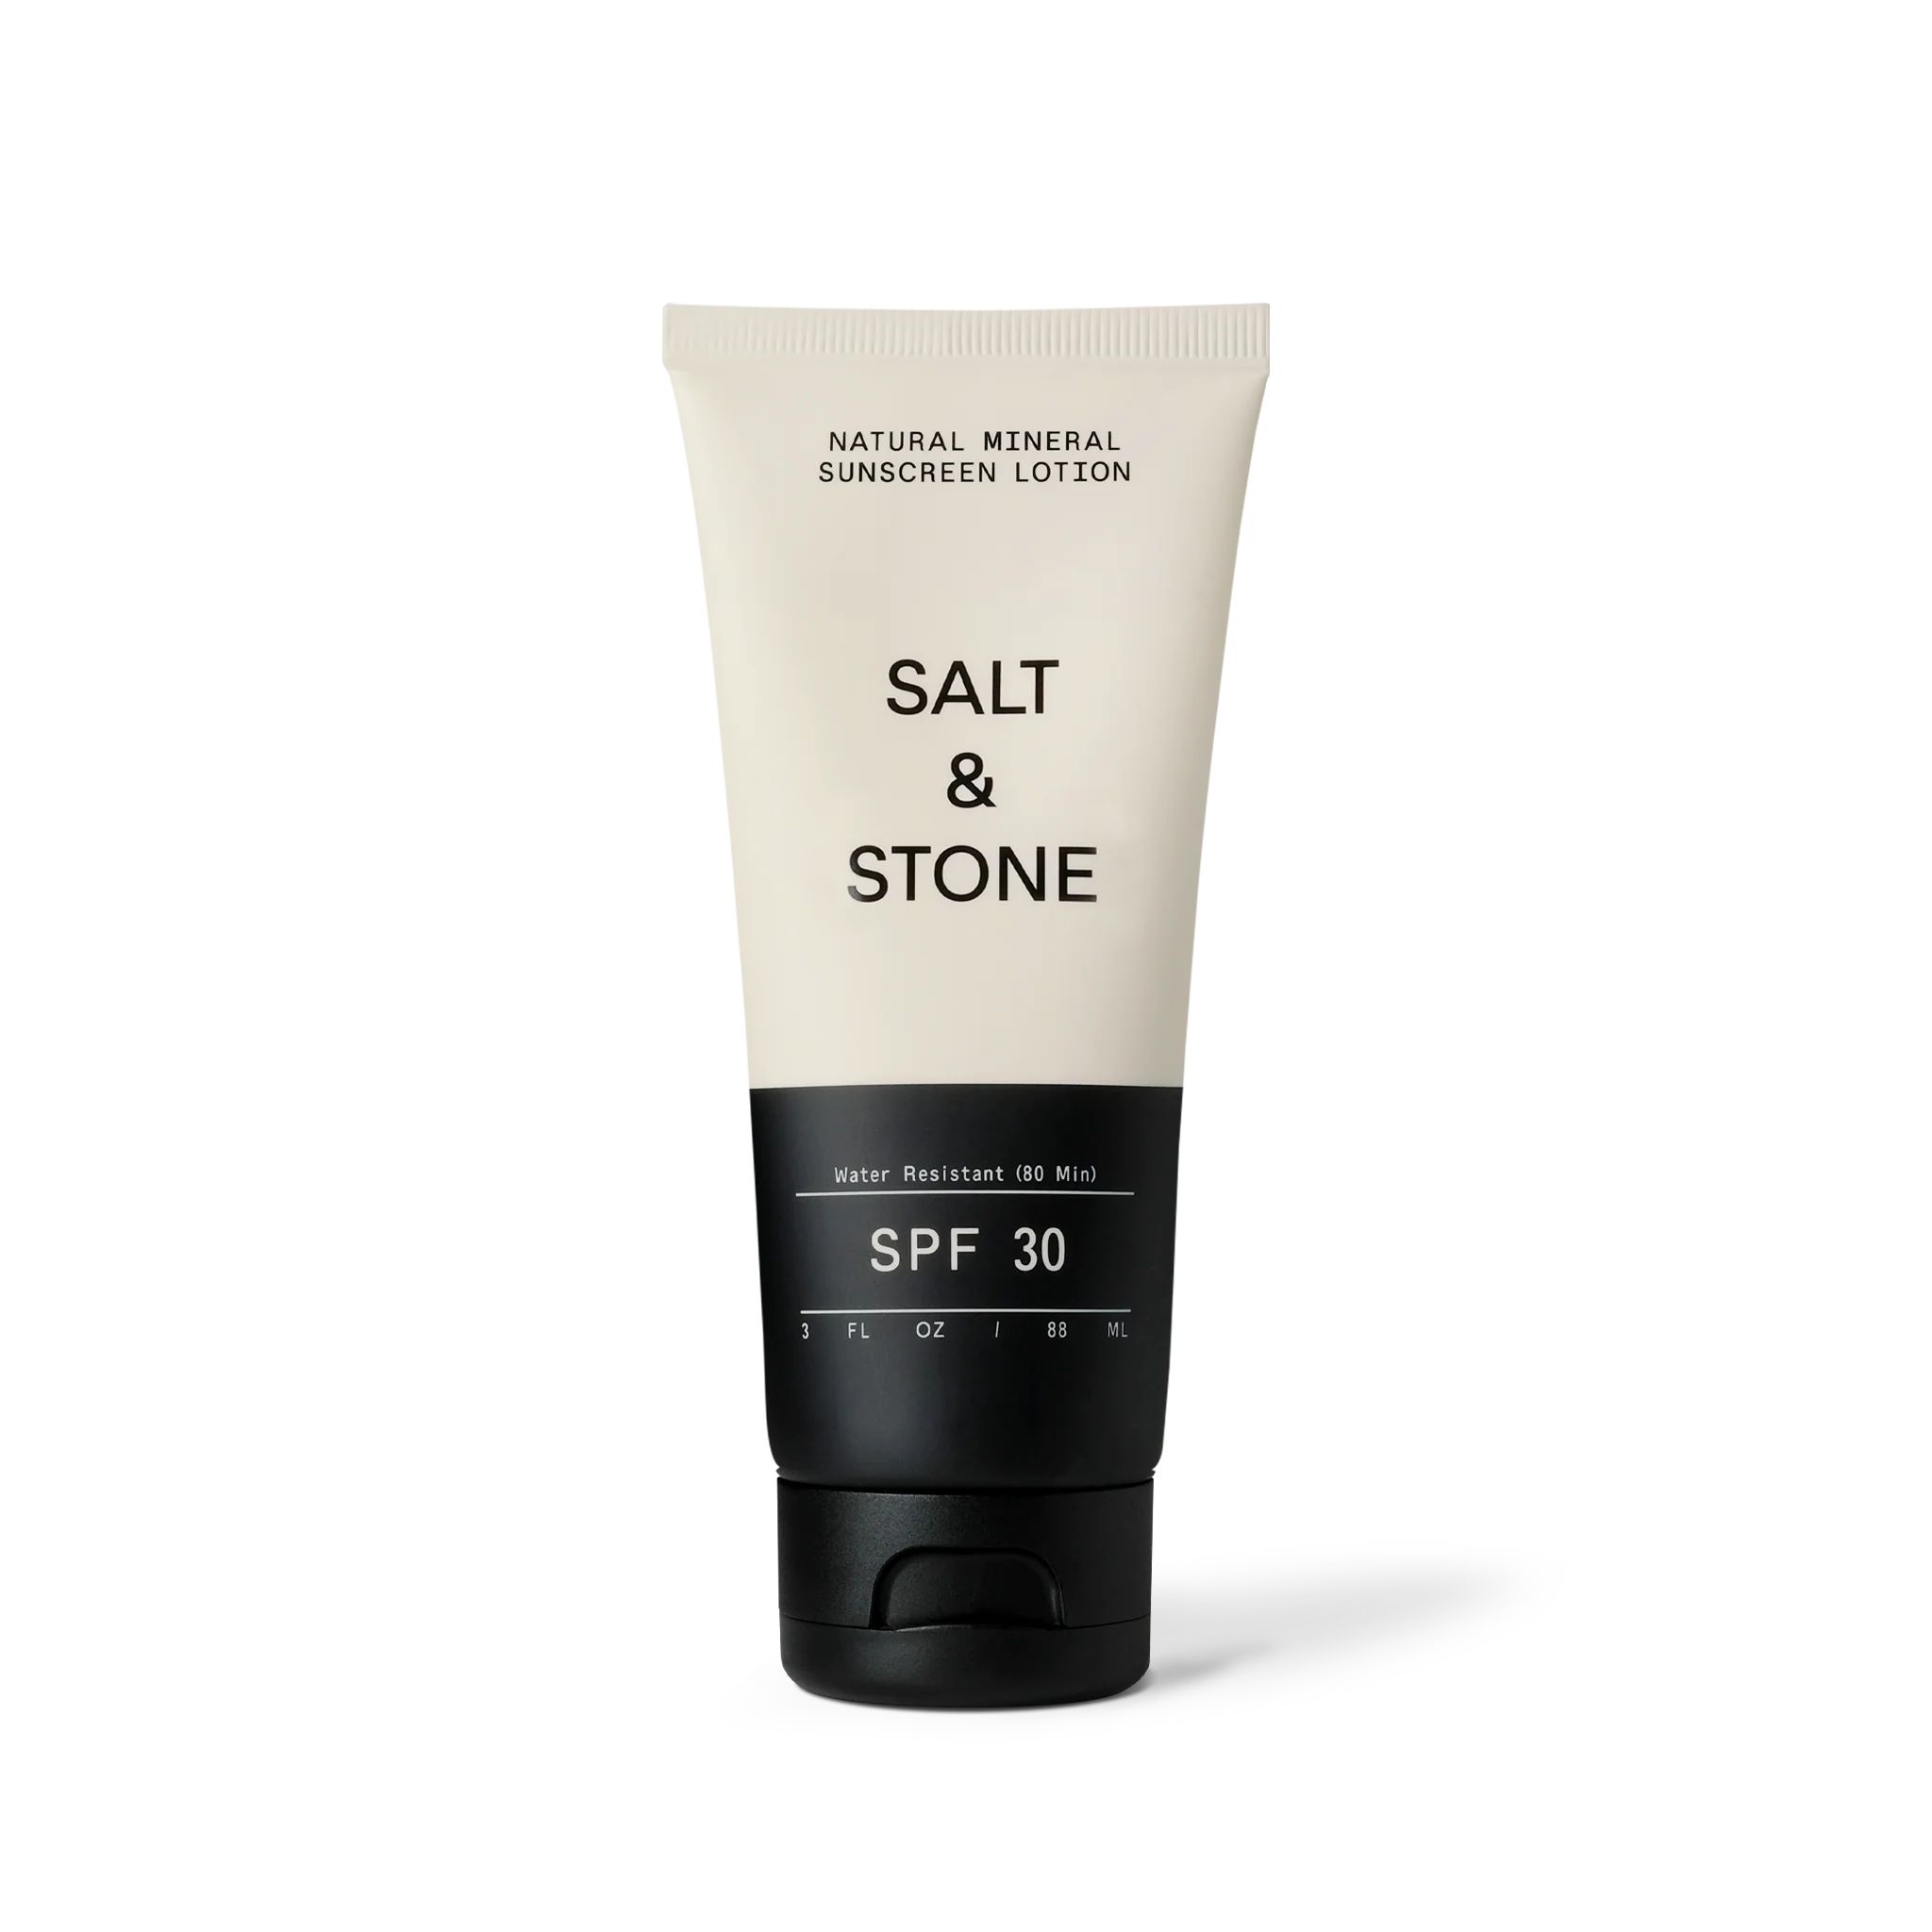 Natural Mineral Sunscreen Lotion SPF 30 | Salt & Stone